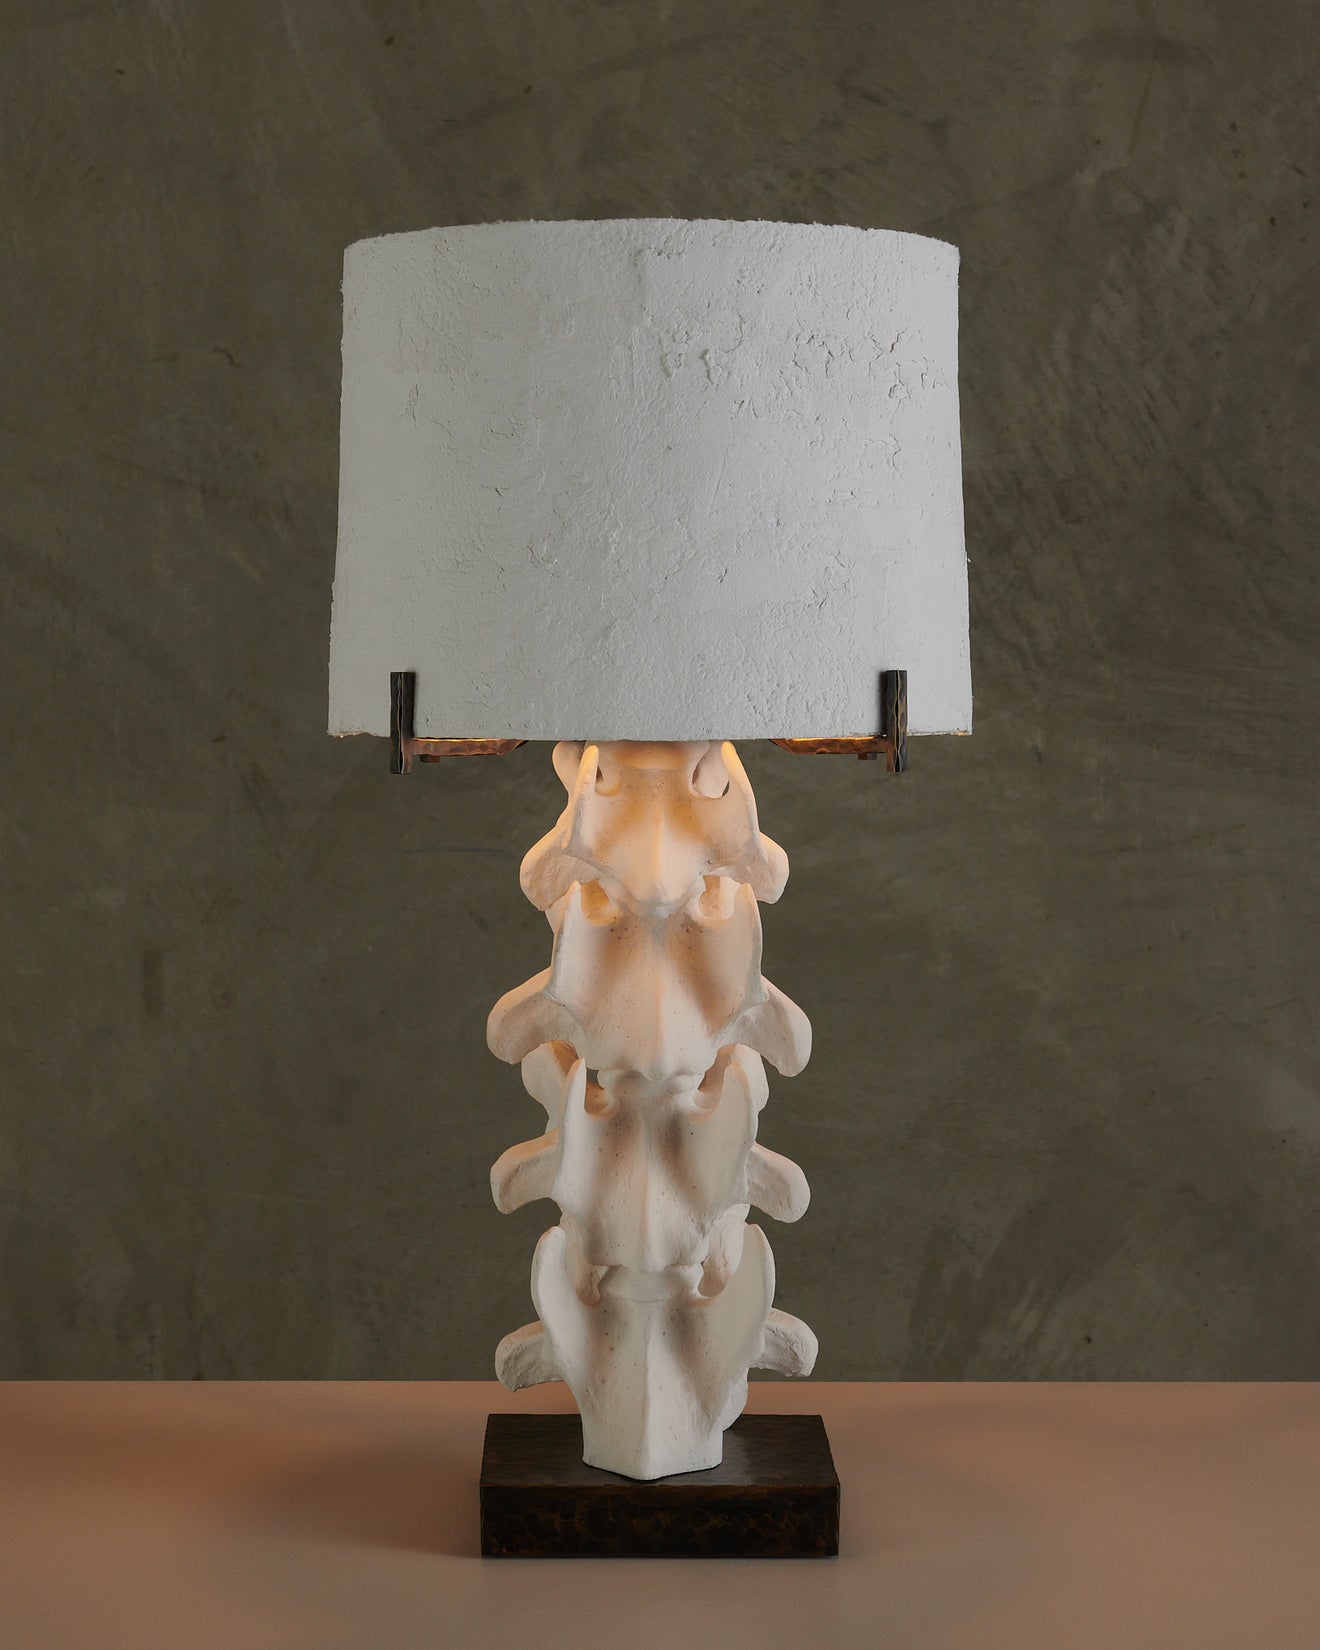 BC WORKSHOP VERTEBRAE TABLE LAMP FROM THE PRIMAL COLLECTION